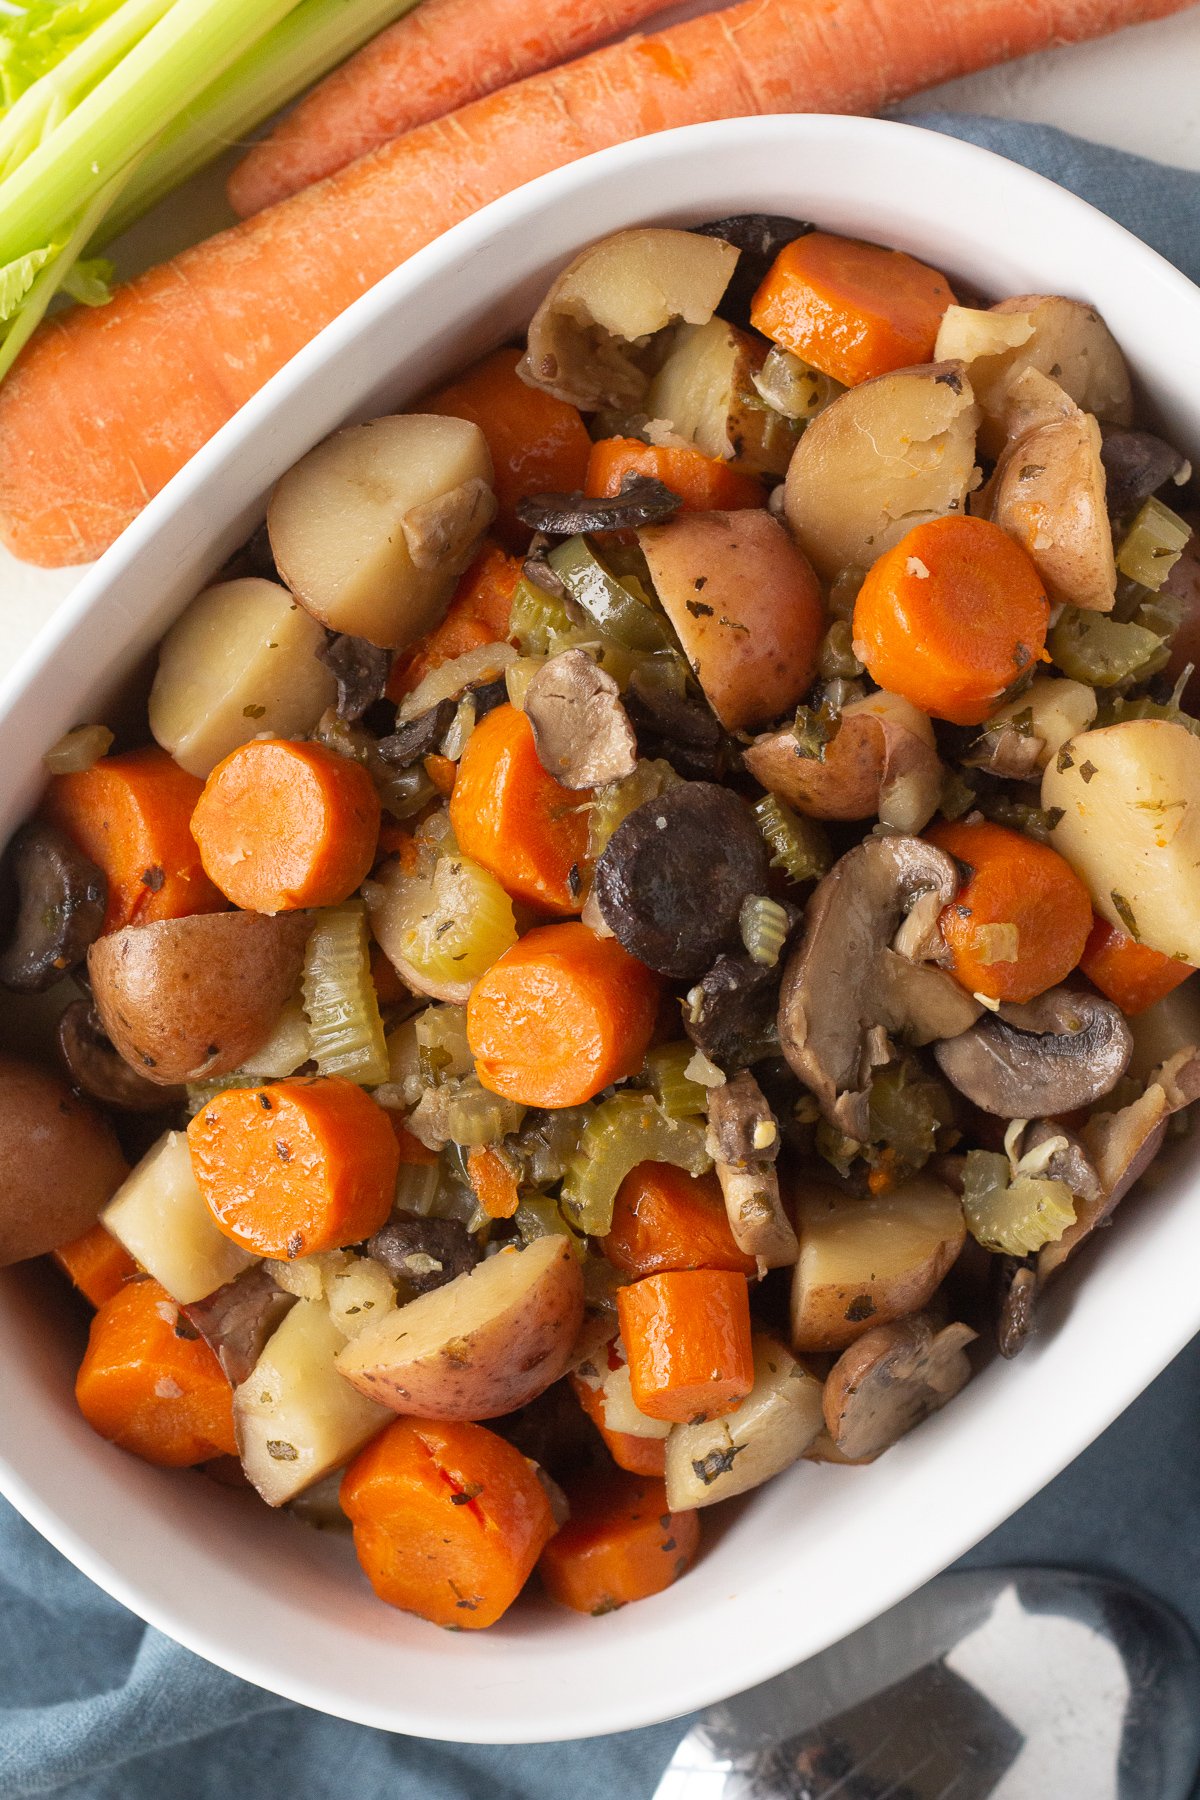 Top view of a serving dish filled with cooked carrots, mushrooms and potatoes.